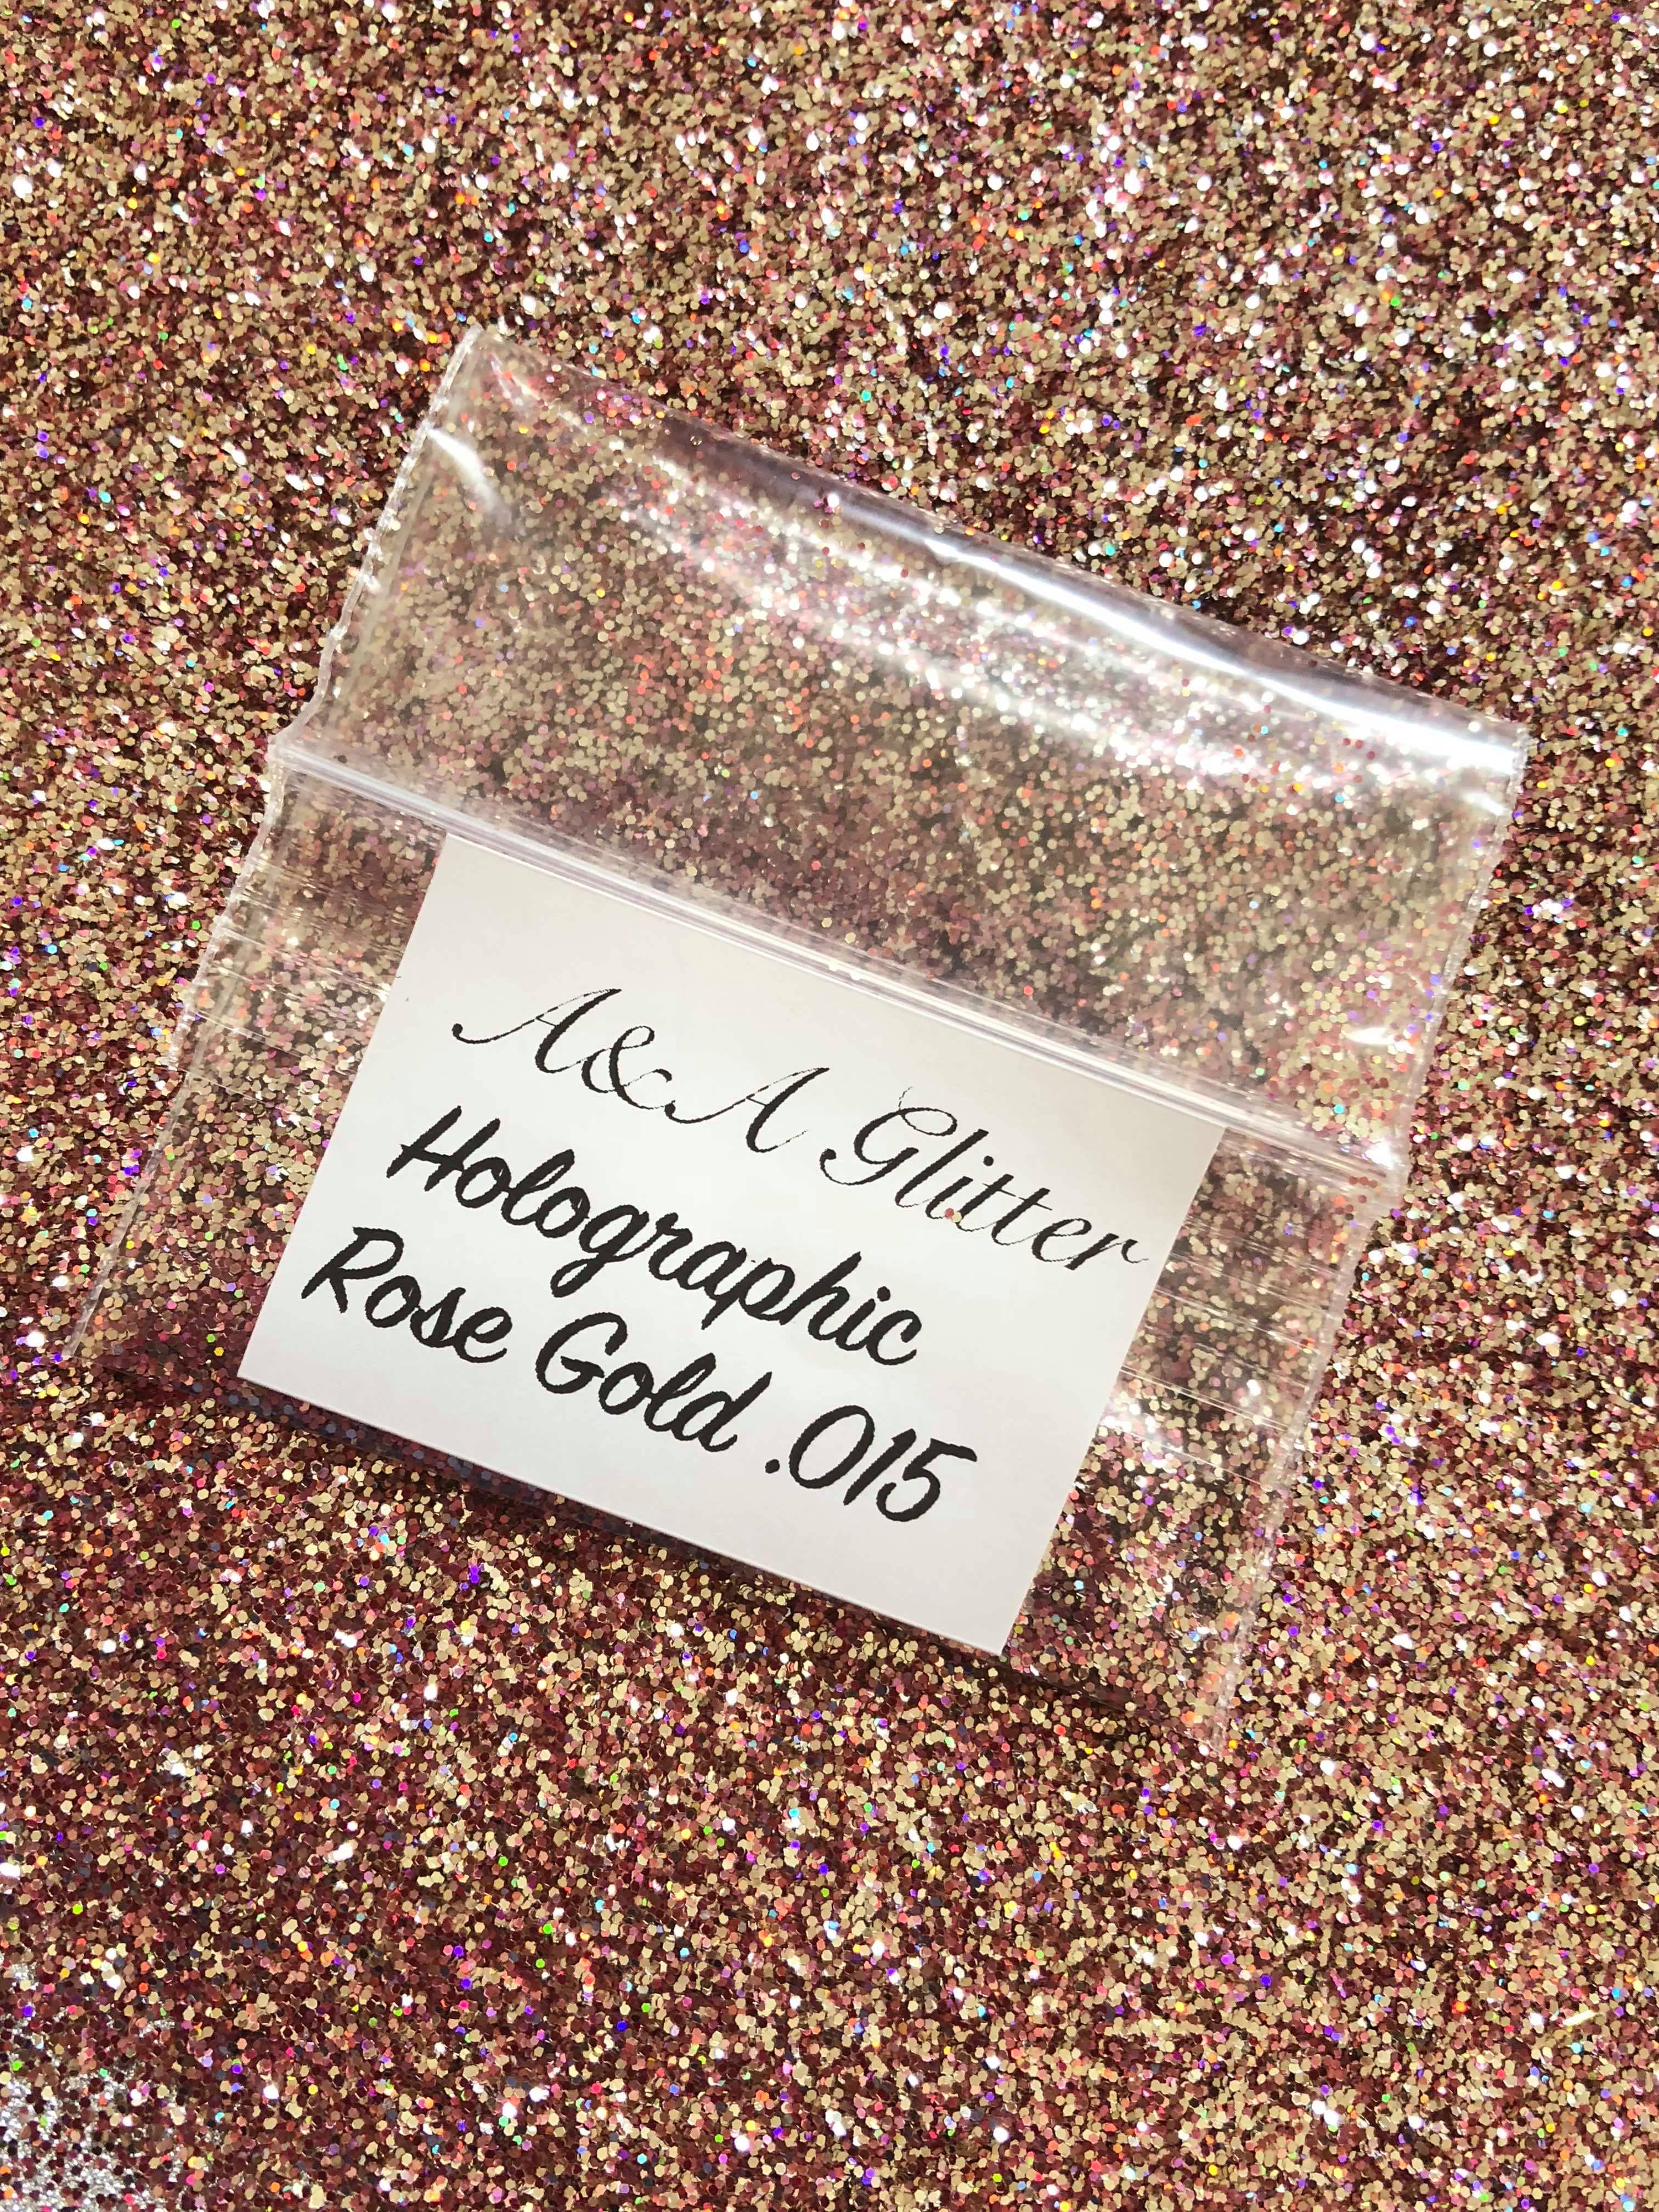 Holographic Rose Gold .015 - A&A Glitter